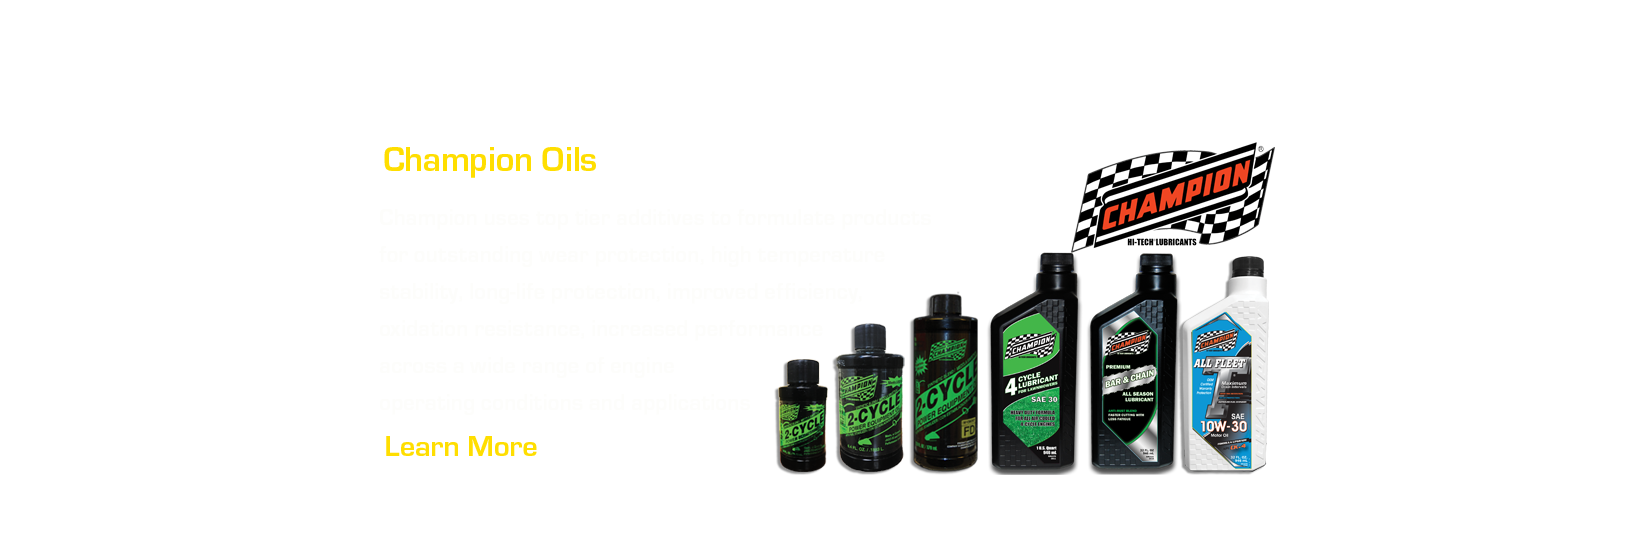 Learn more about Champion Oils